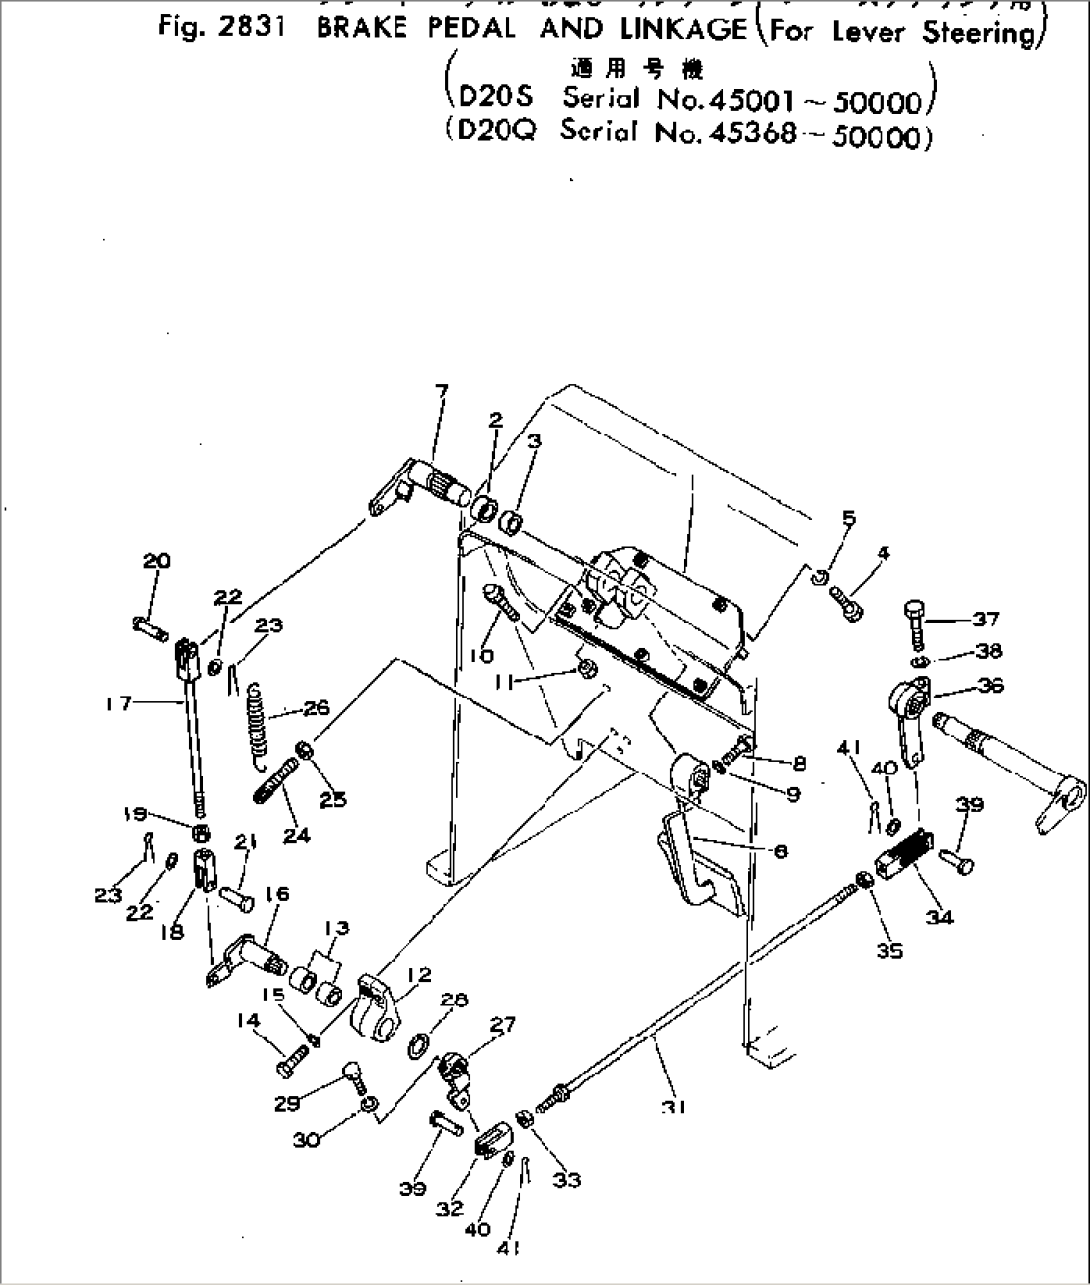 BRAKE PEDAL AND LINKAGE (FOR LEVER STEERING)(#45001-50000)